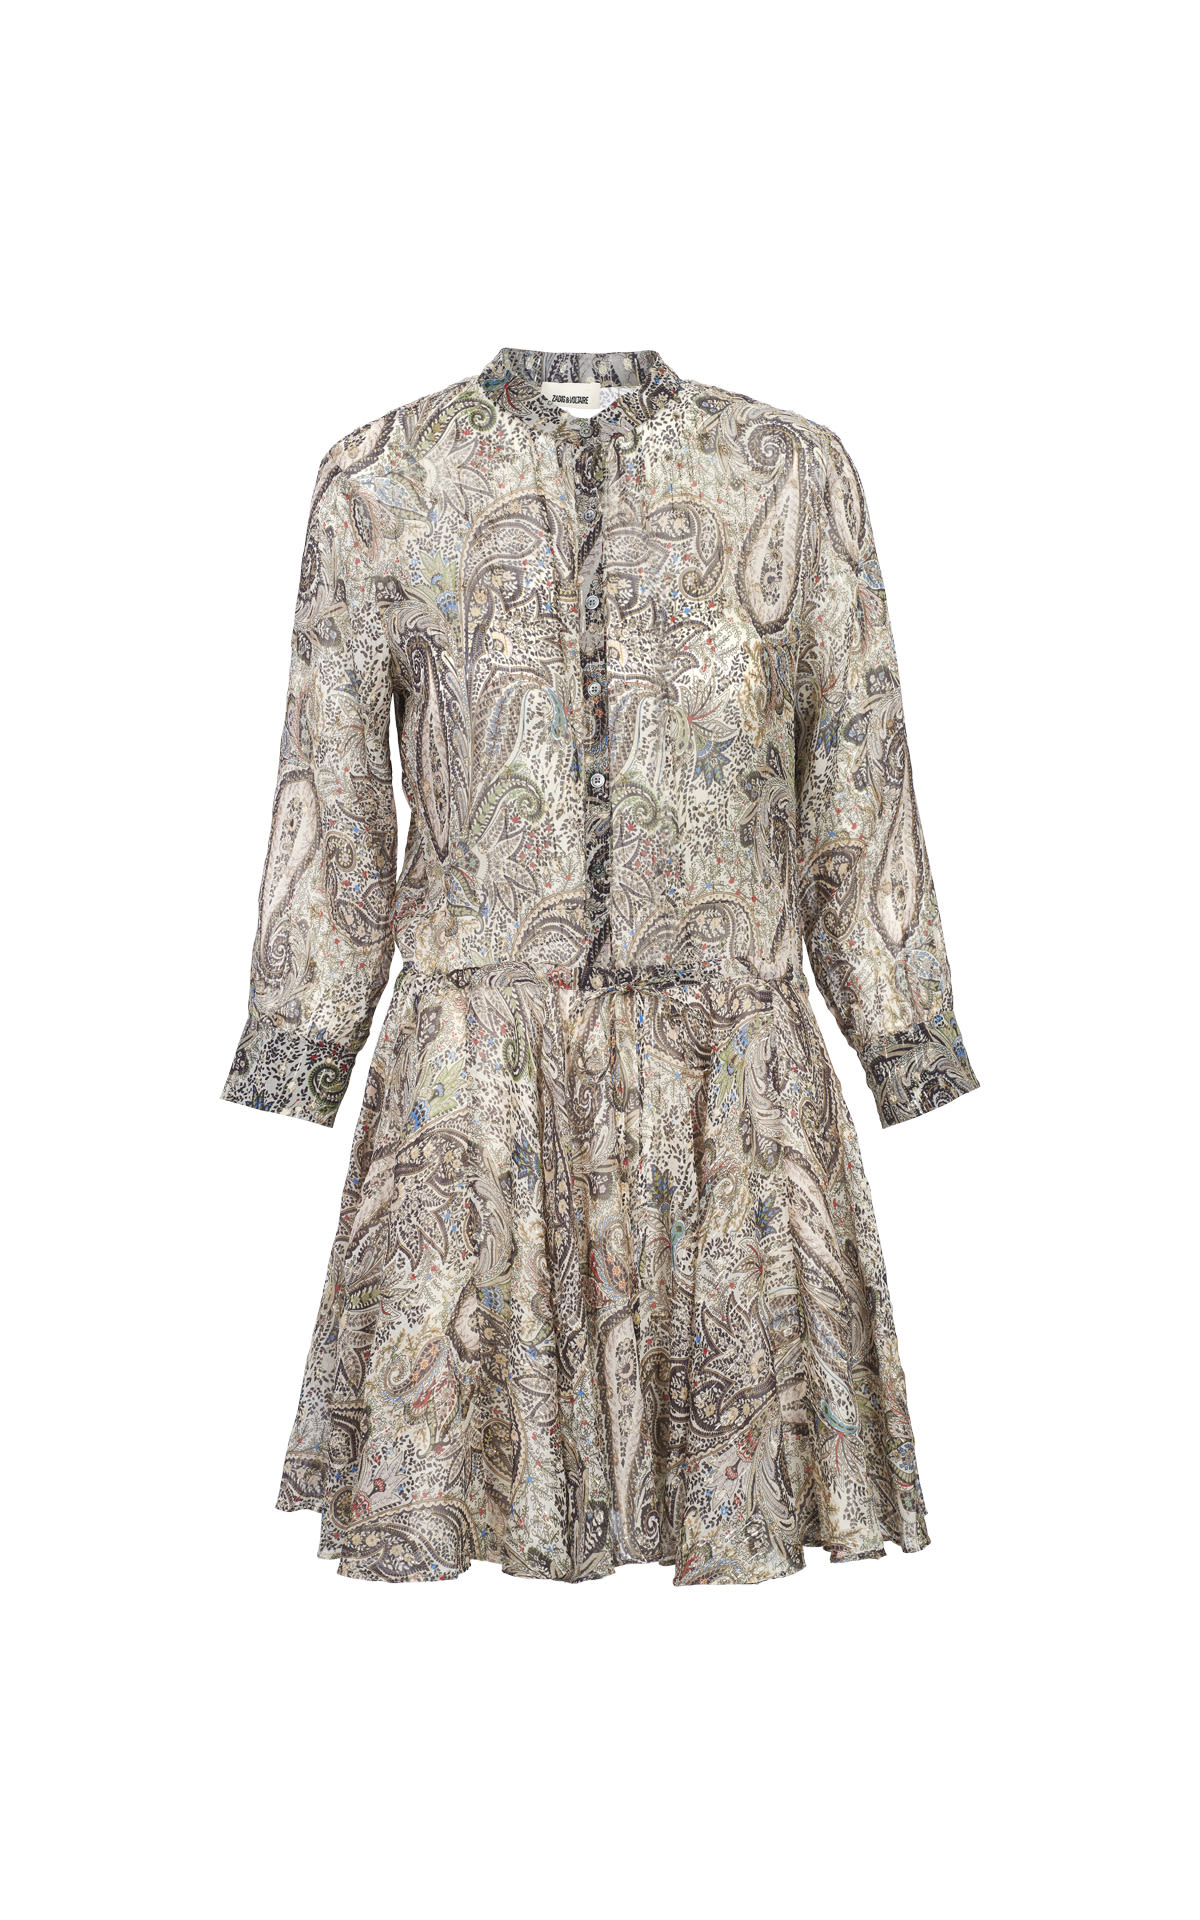 Long-sleeved printed dress Zadig&Voltaire